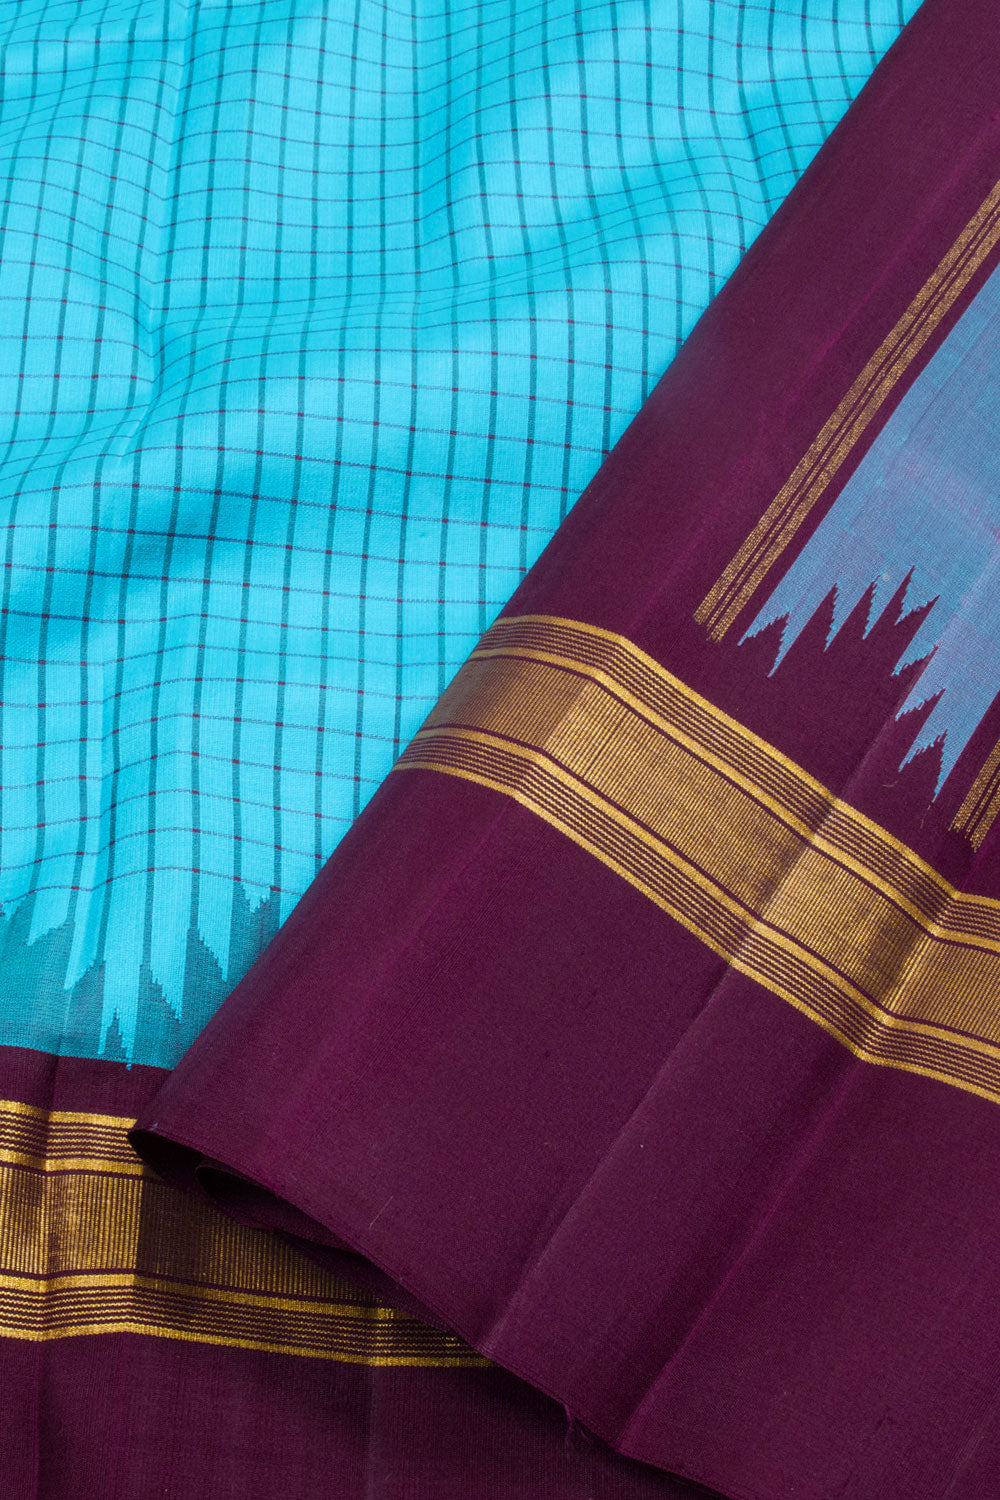 Buy Bangalore Silk Sarees Online at the Best Quality